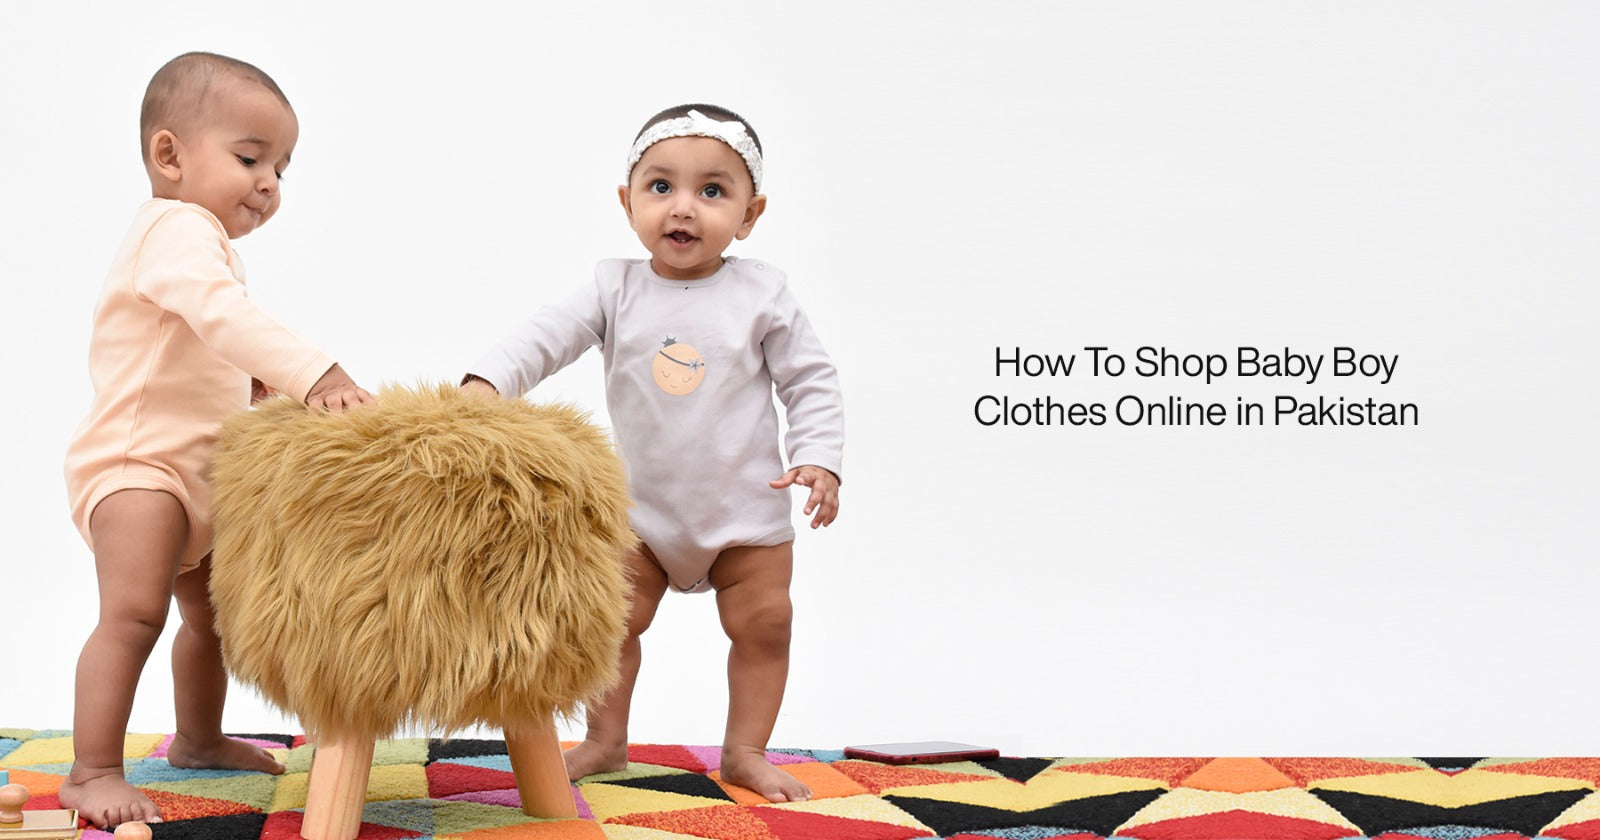 How To Shop Baby Boy Clothes Online in Pakistan